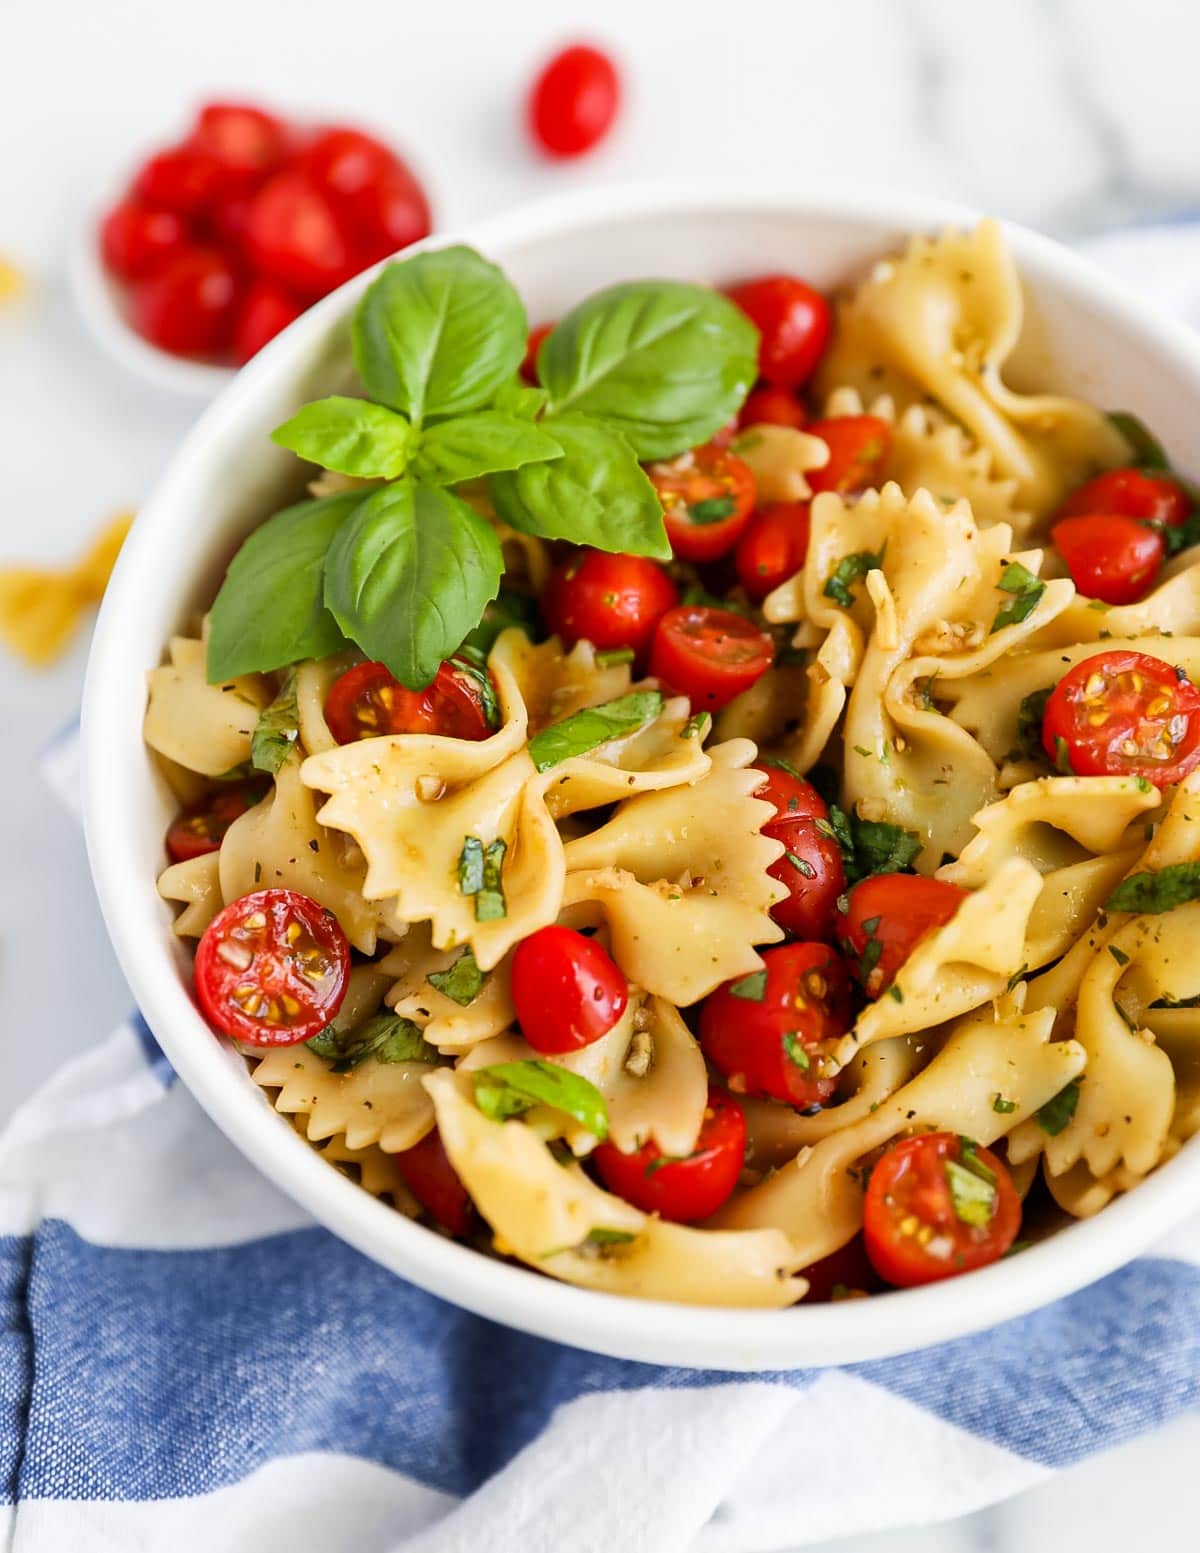 A side angle picture of pasta, sliced red tomatoes, and fresh basil